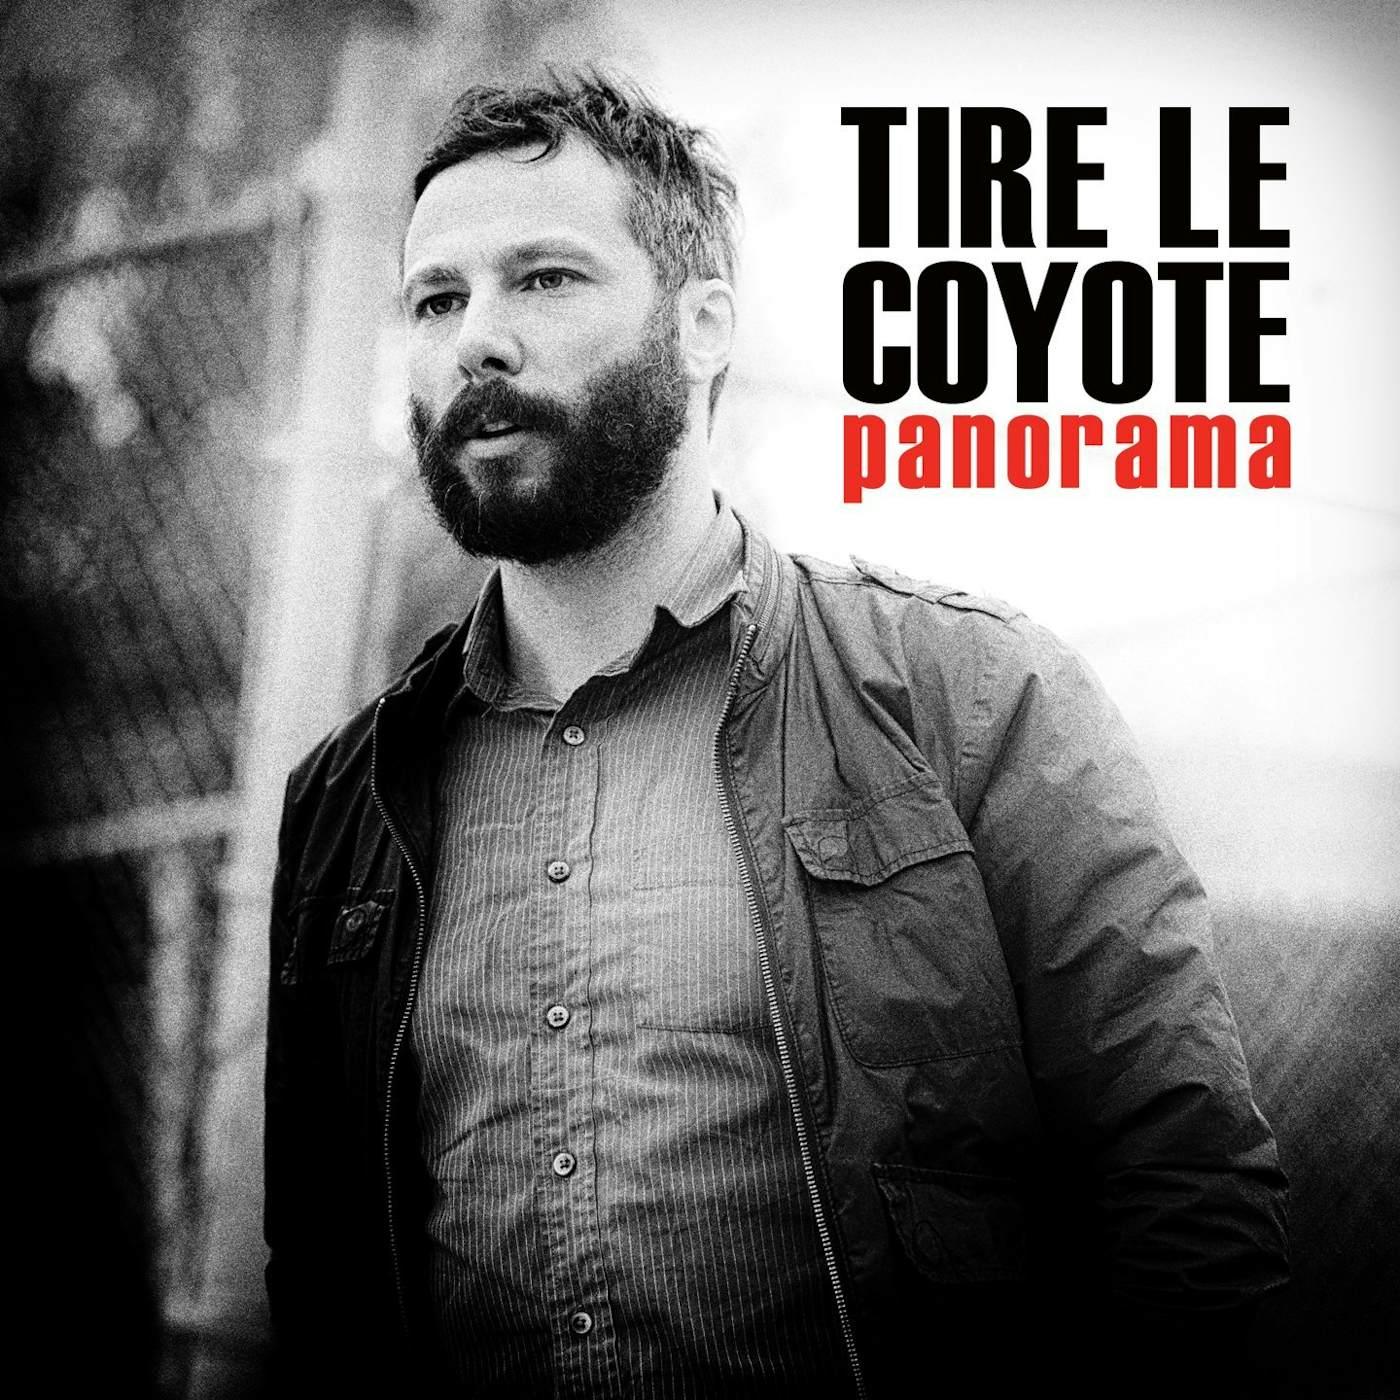 Tire Le Coyote PANORAMA CD